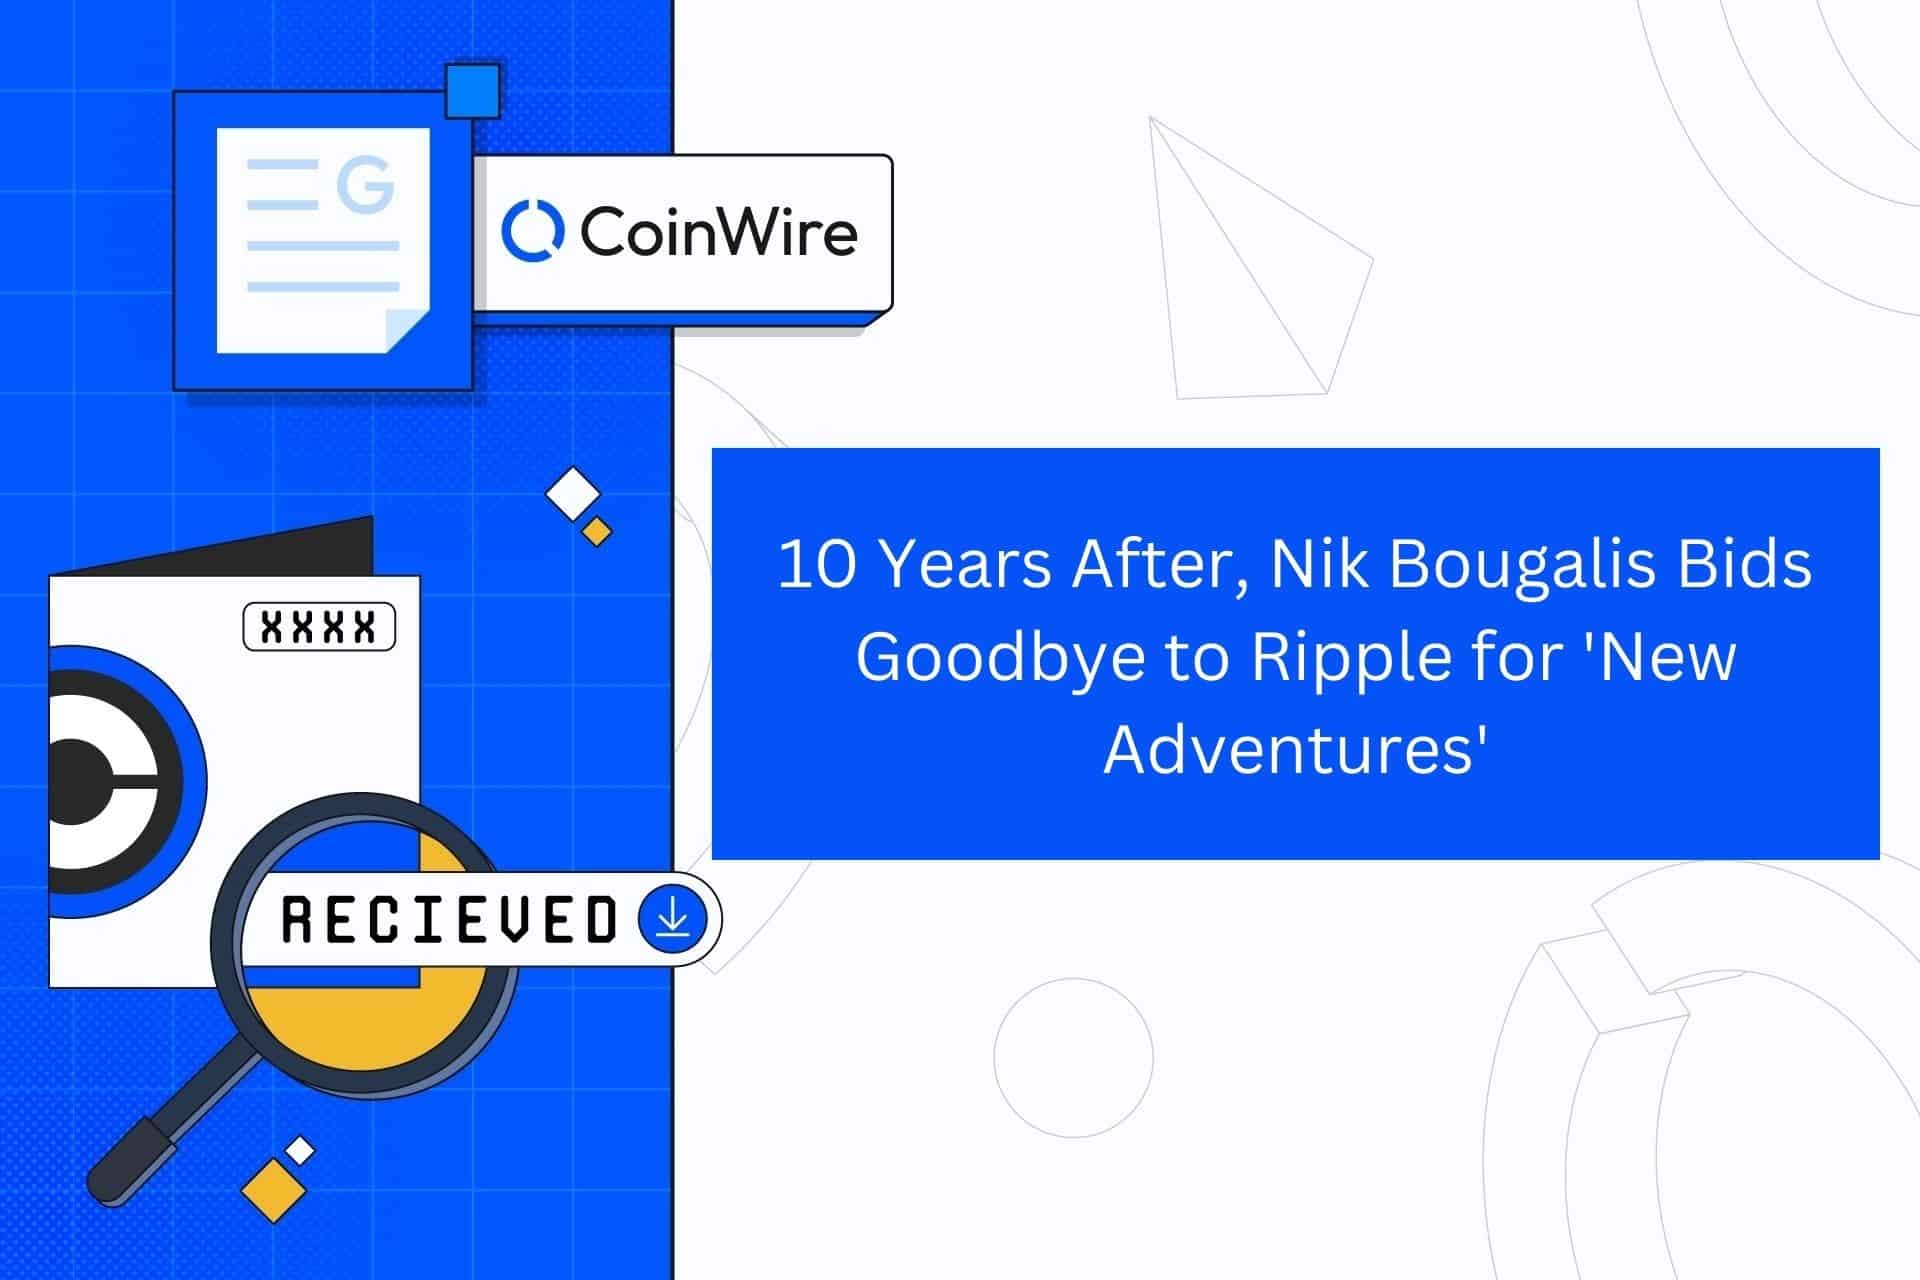 10 Years After, Nik Bougalis Bids Goodbye To Ripple For 'New Adventures'